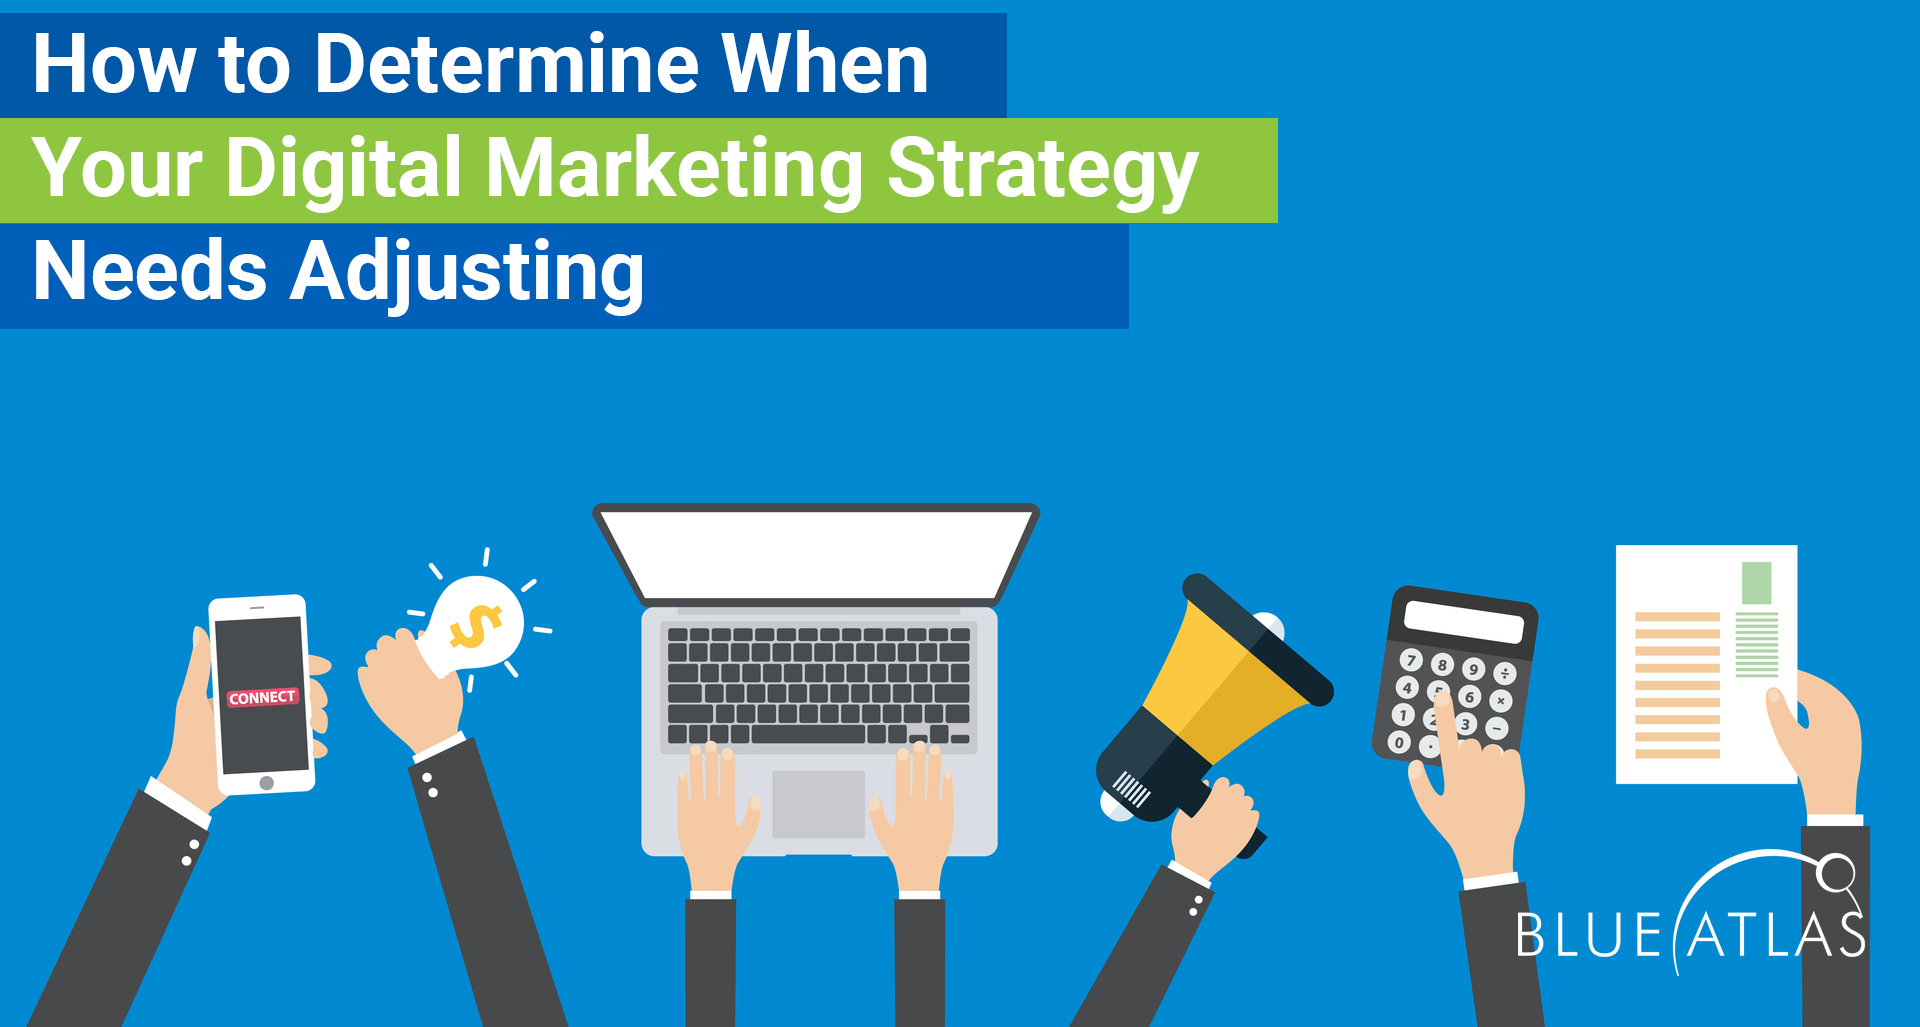 How to Determine When Your Digital Marketing Strategy Needs Adjusting